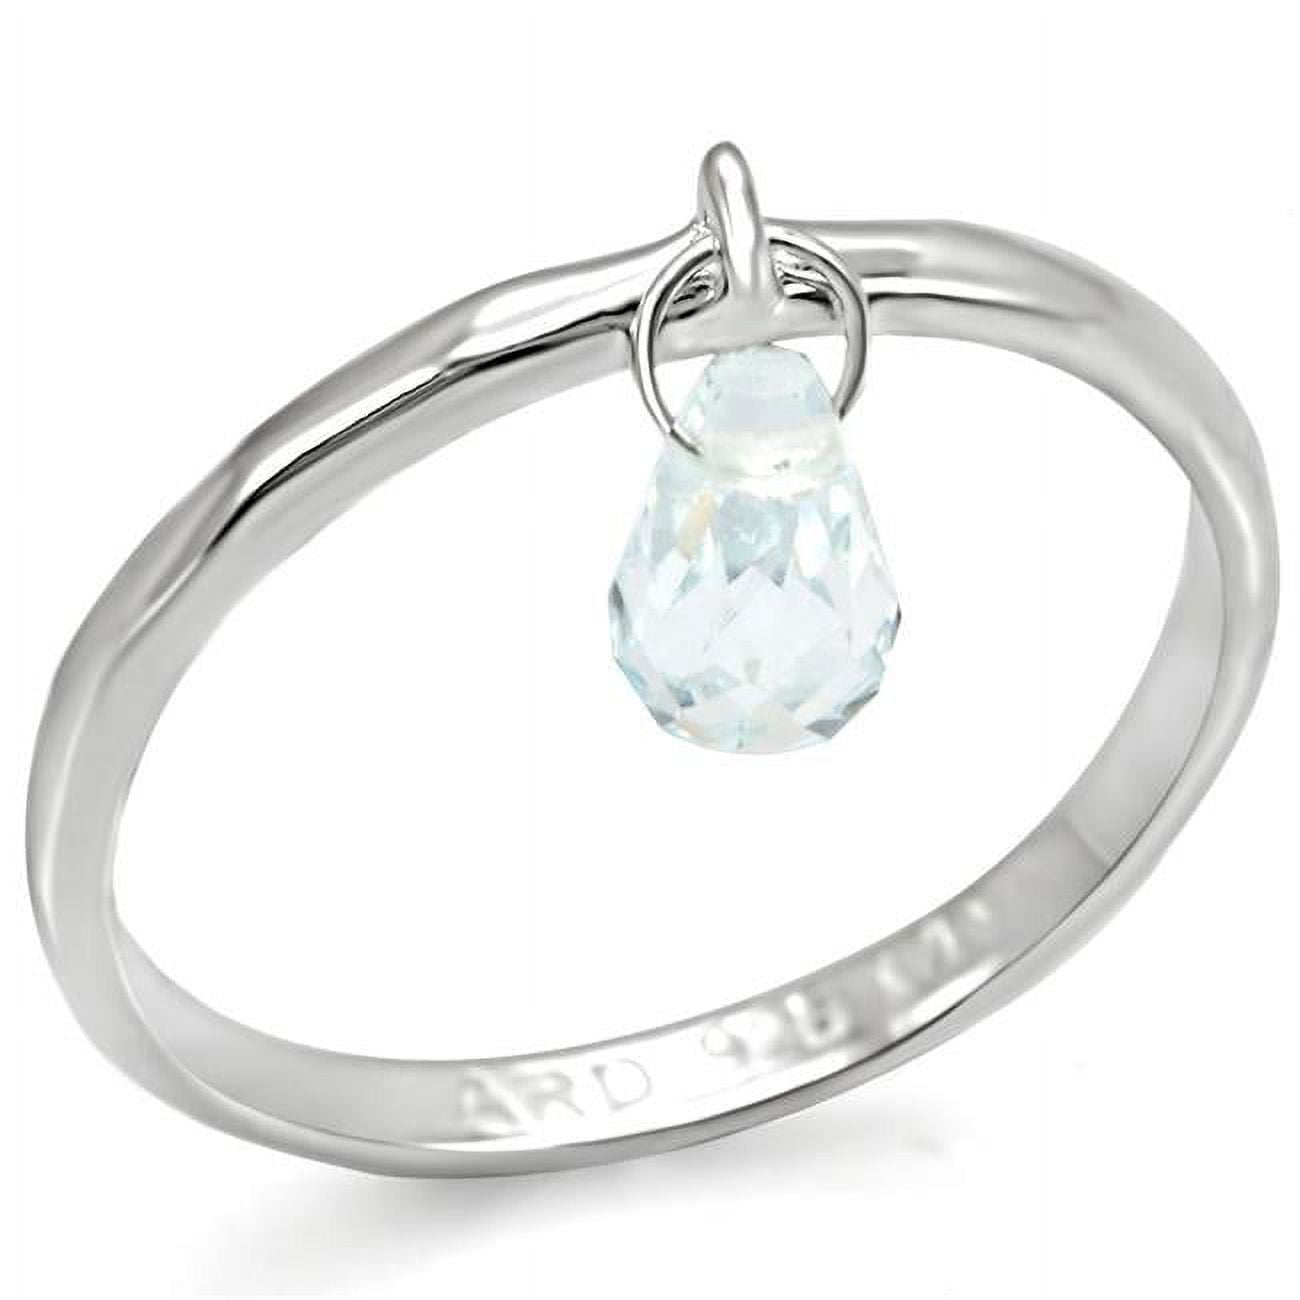 Picture of Alamode LOS318-6 Women Silver 925 Sterling Silver Ring with Genuine Stone in Aquamarine - Size 6